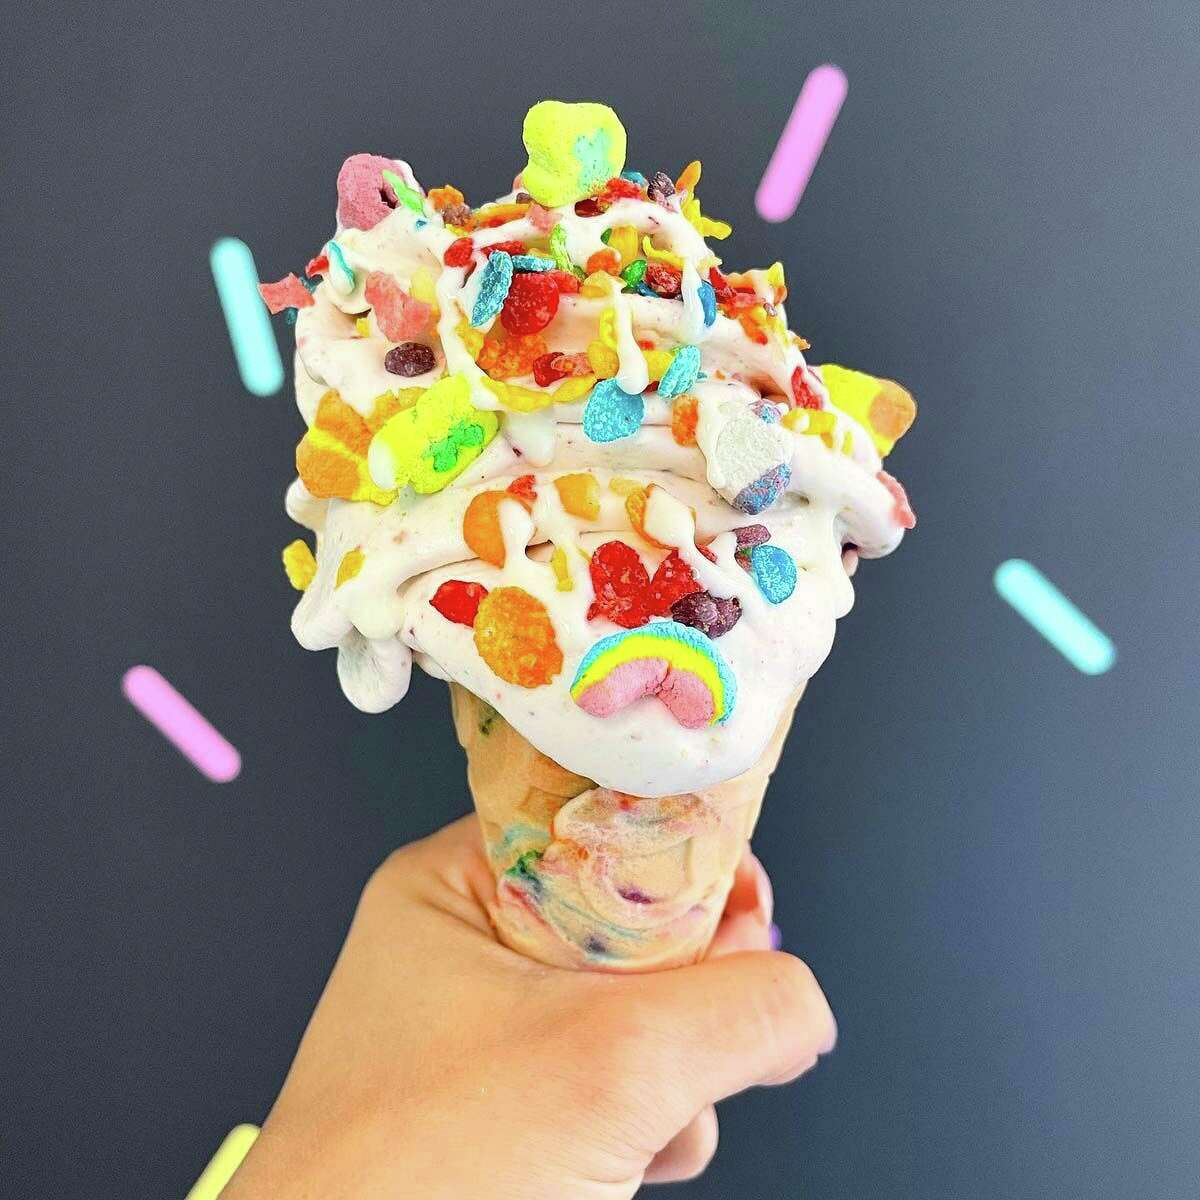 The Rainbow Connection at Sundae Funday, with vanilla ice cream, Fruity Pebbles, Lucky Charms and marshmallow sauce on a birthday cake flavored cone.